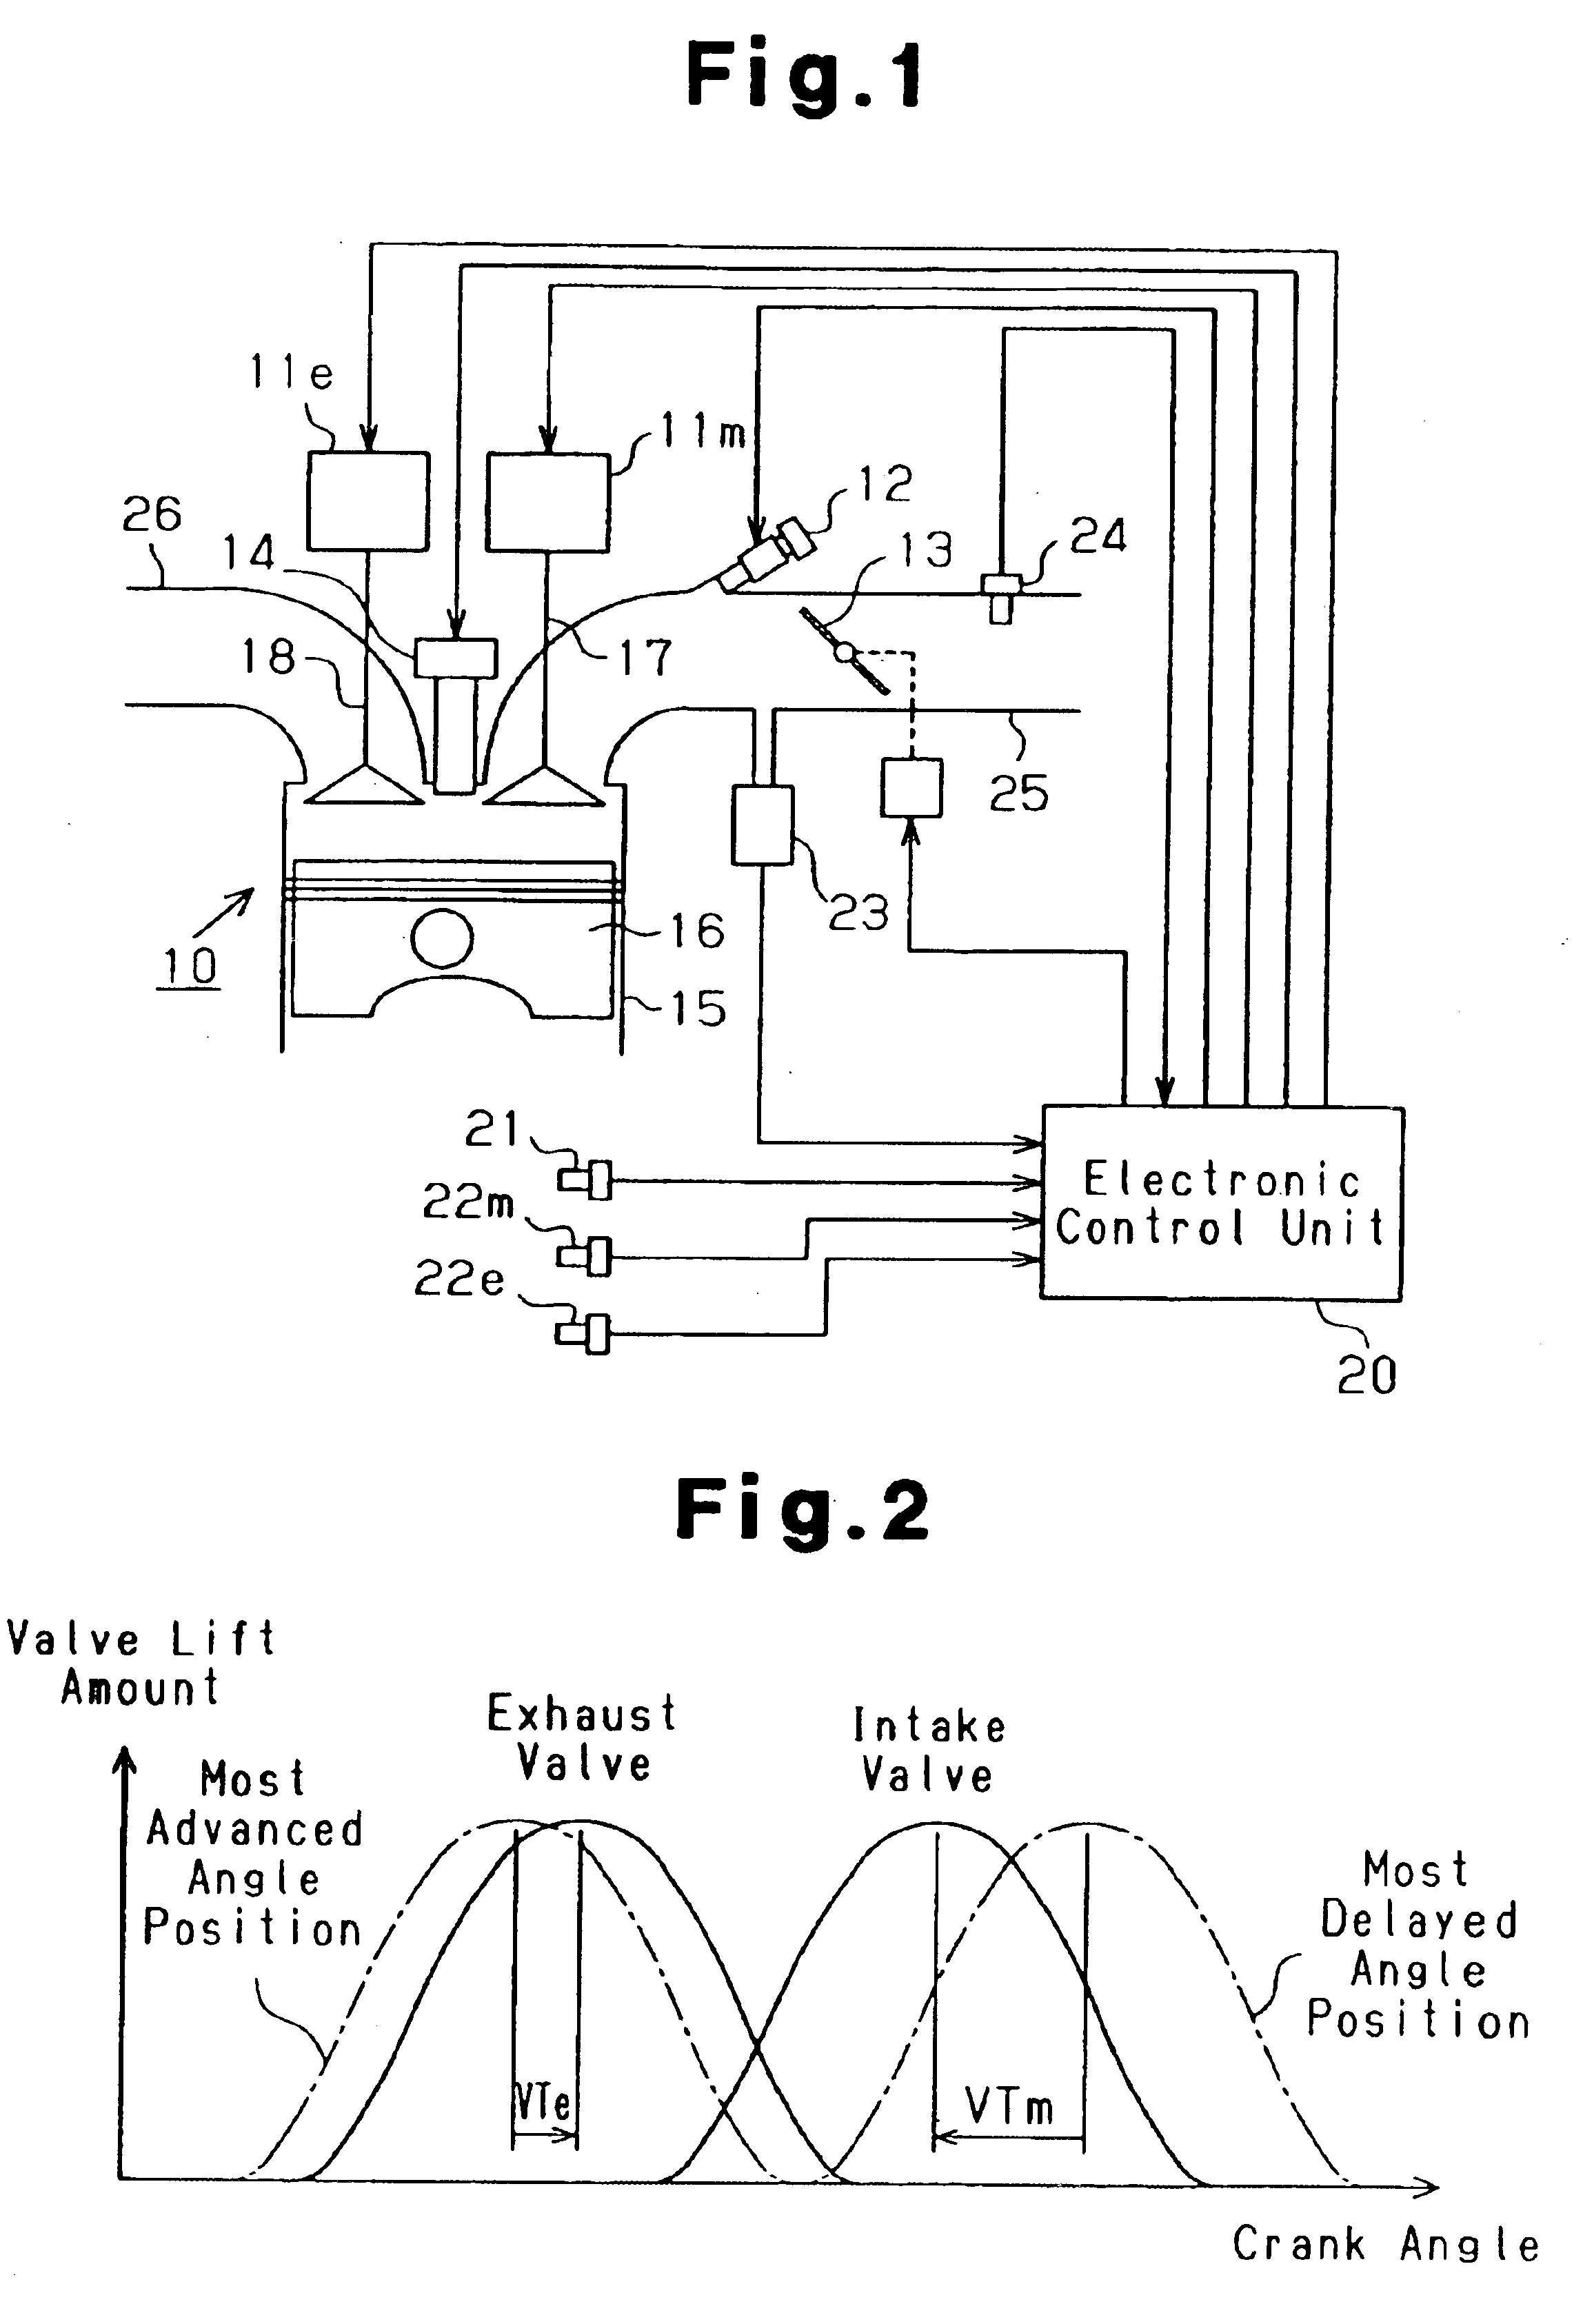 Apparatus for controlling internal combustion engine